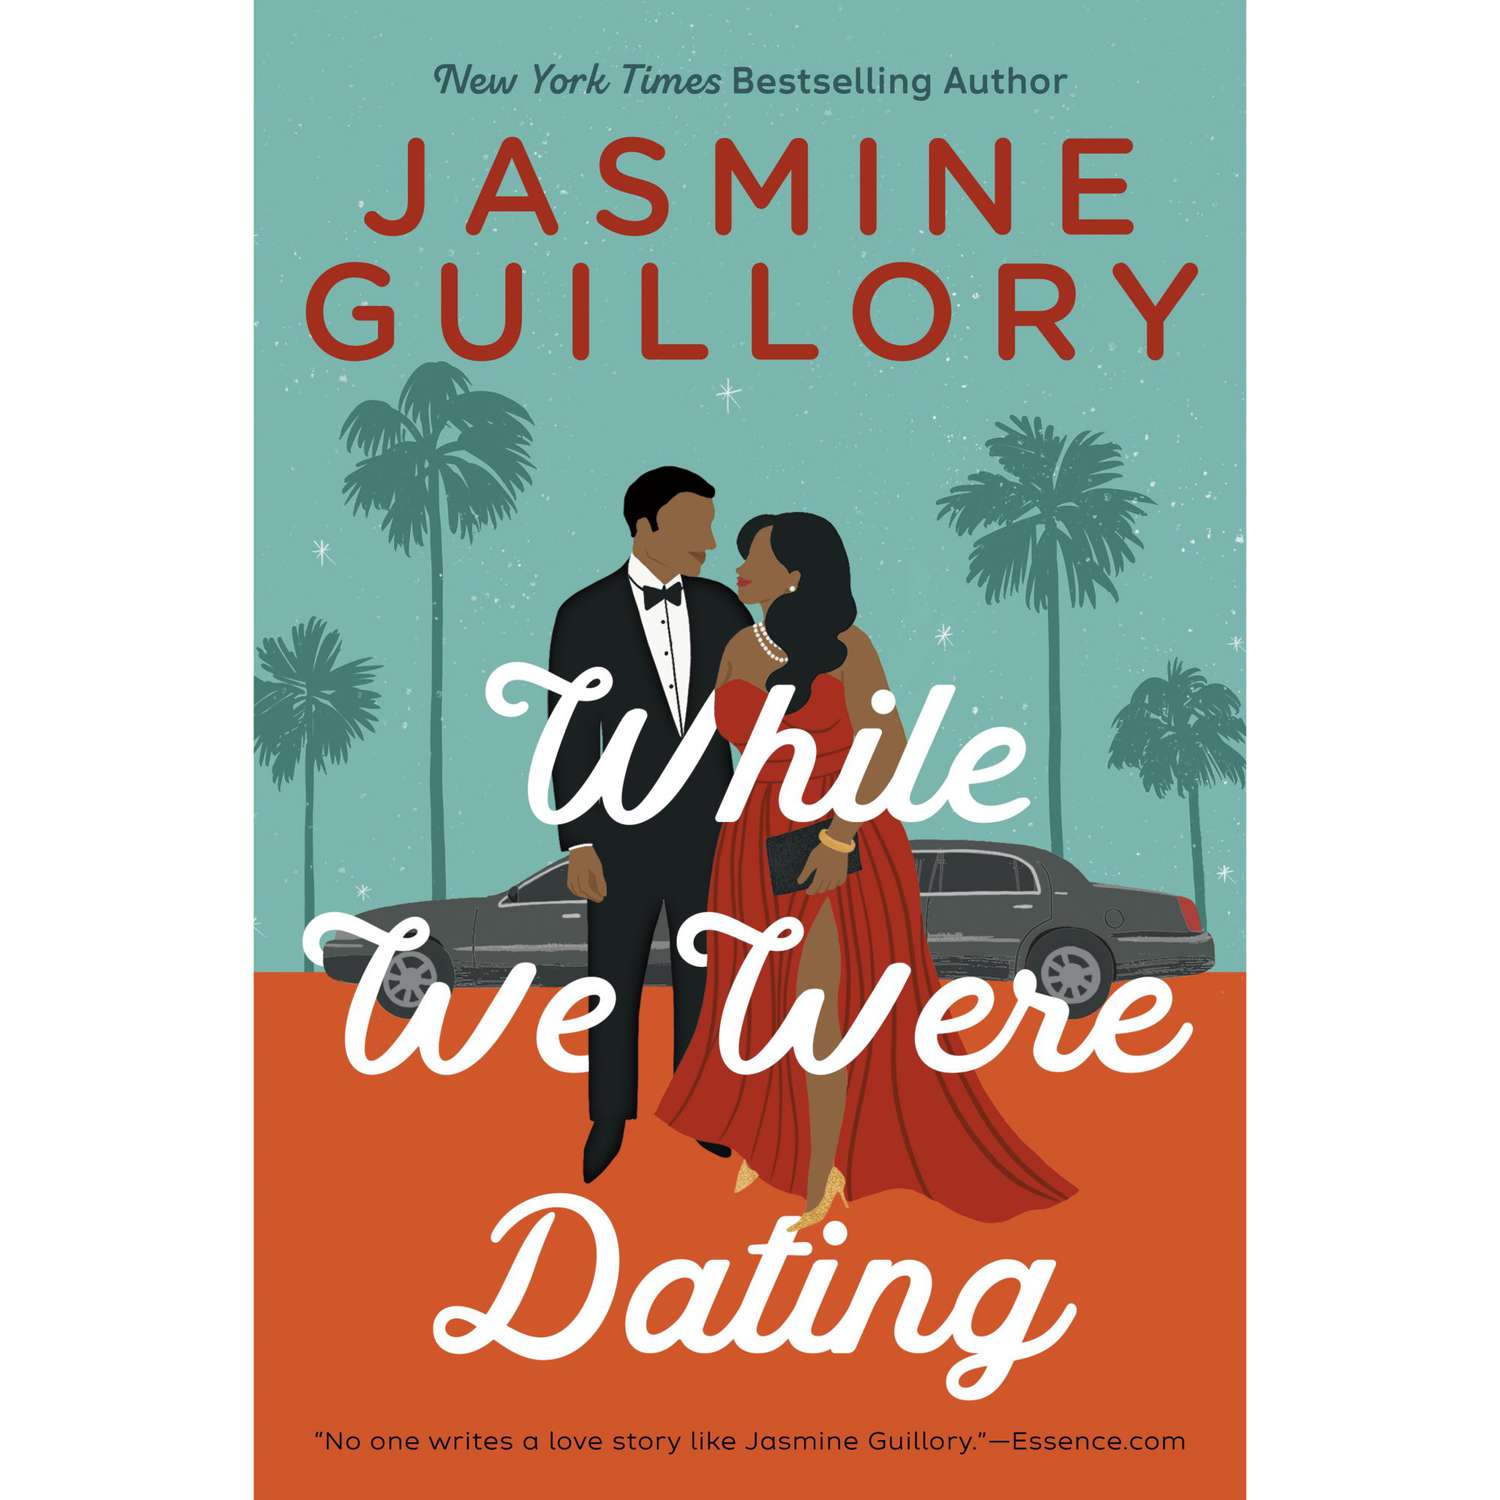 While We Were Dating by Jasmine Guillory (July 13th)